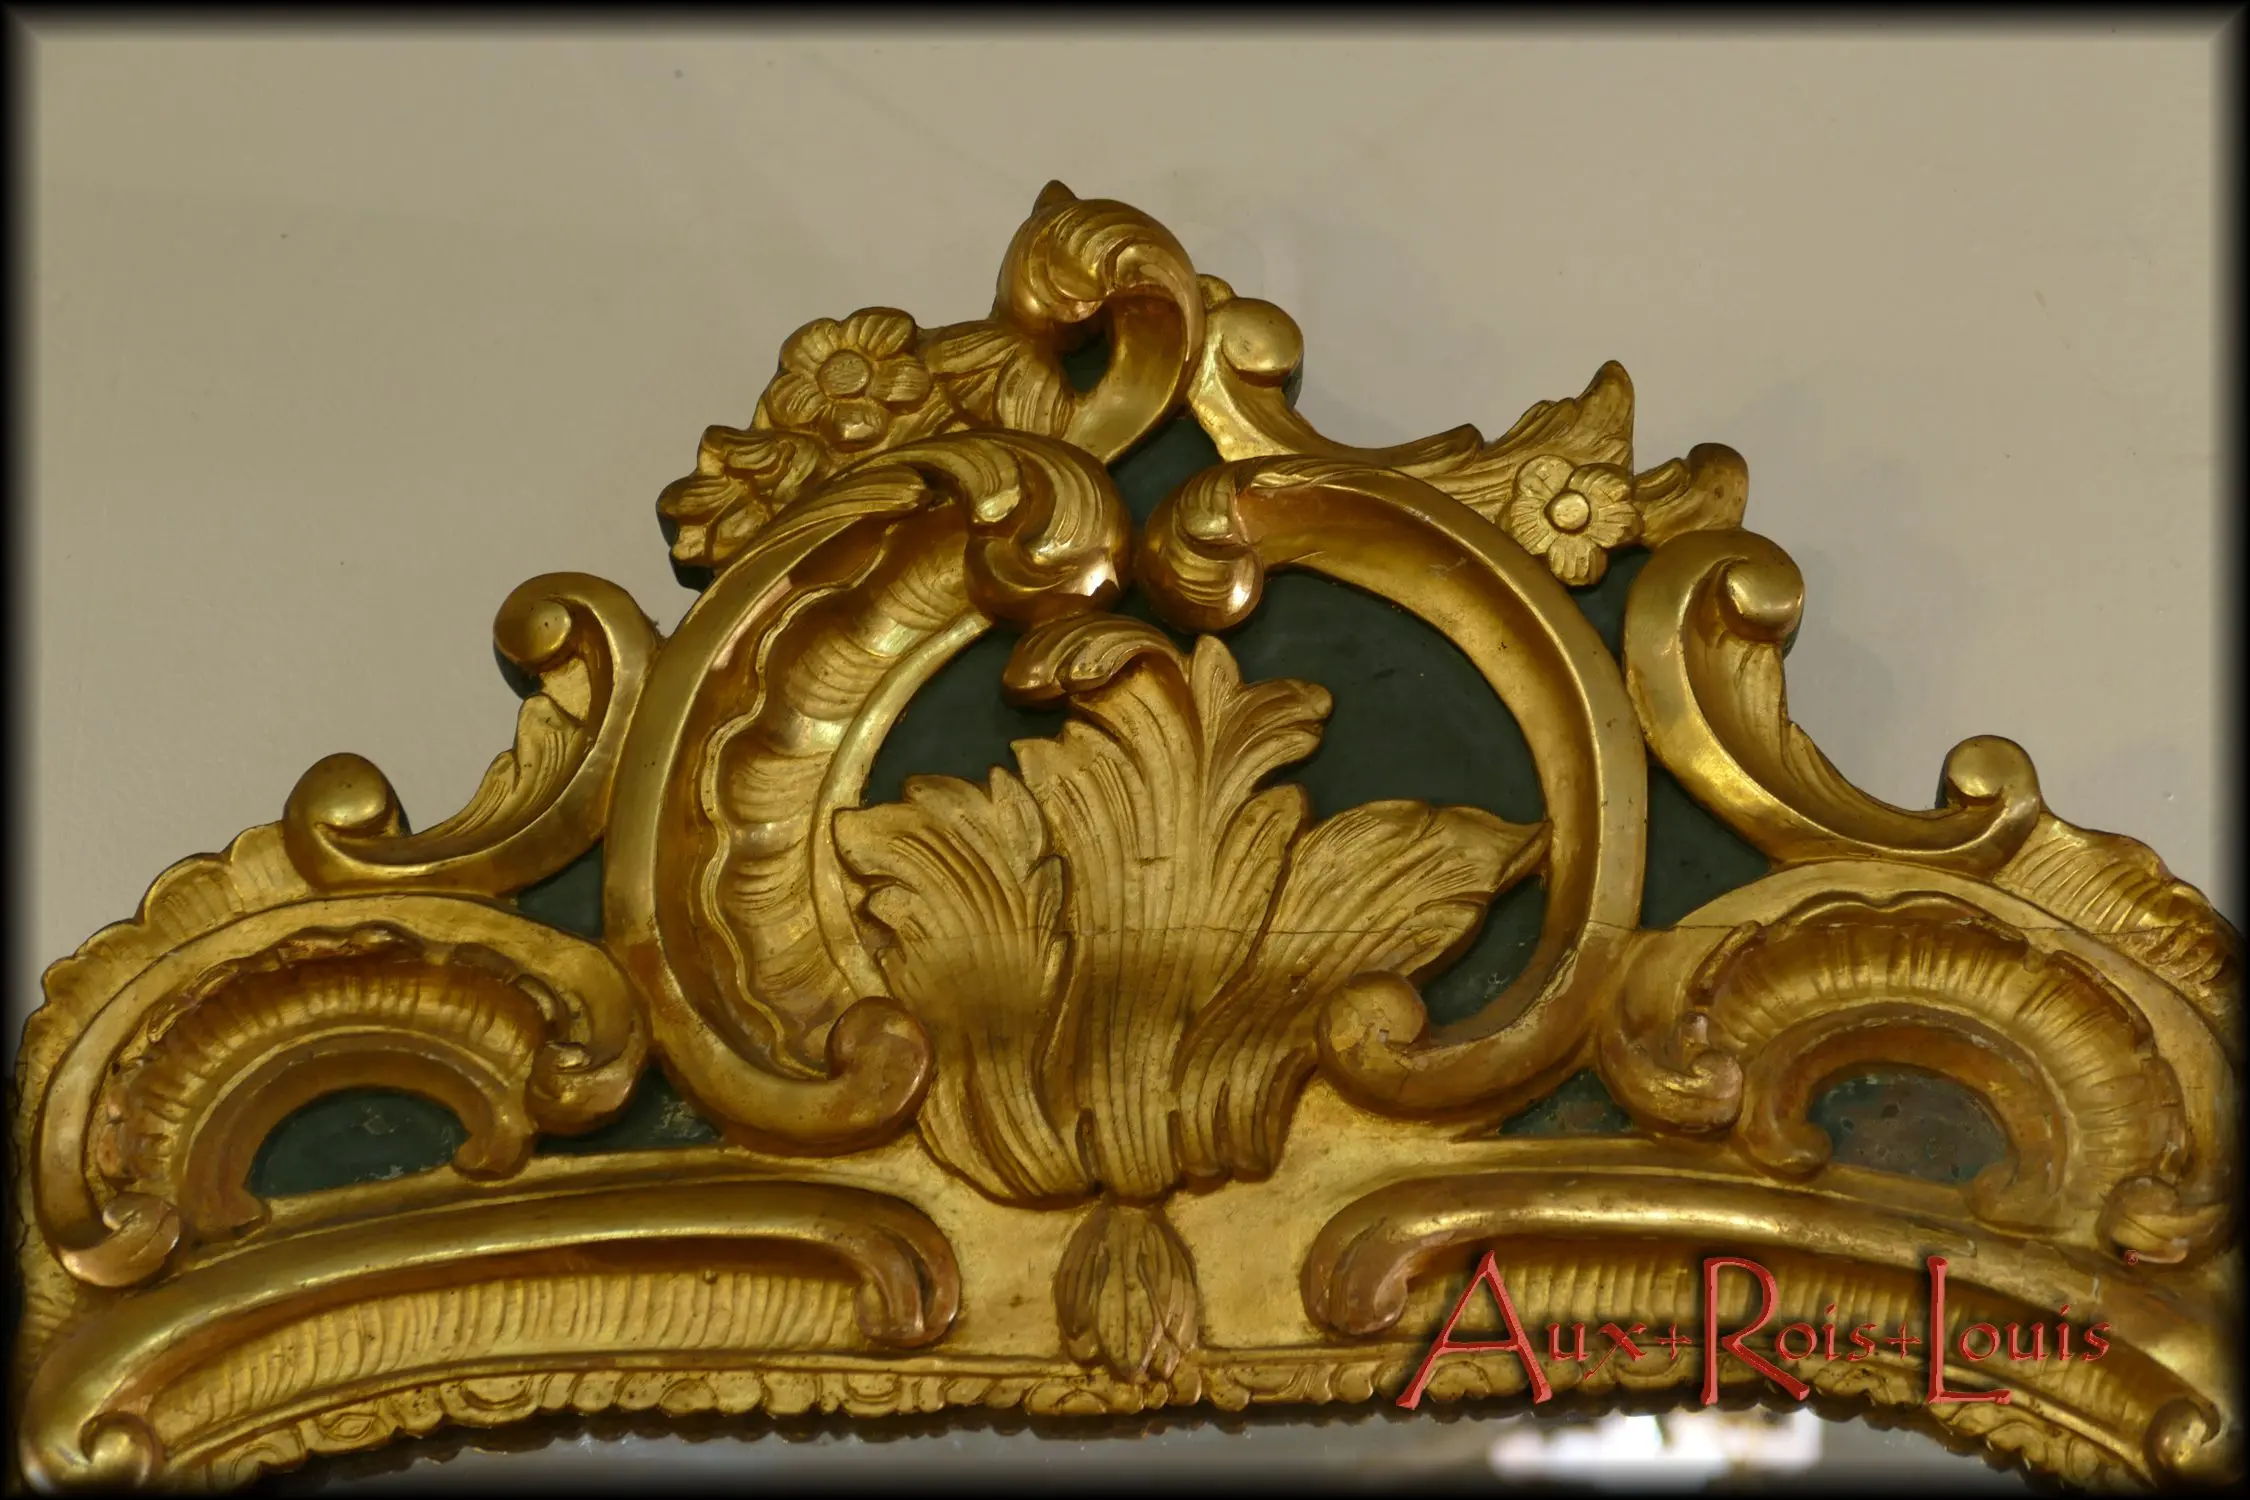 On the pediment, the Rocaille style frees up ornamentation, asymmetrical and vegetal in abundance.